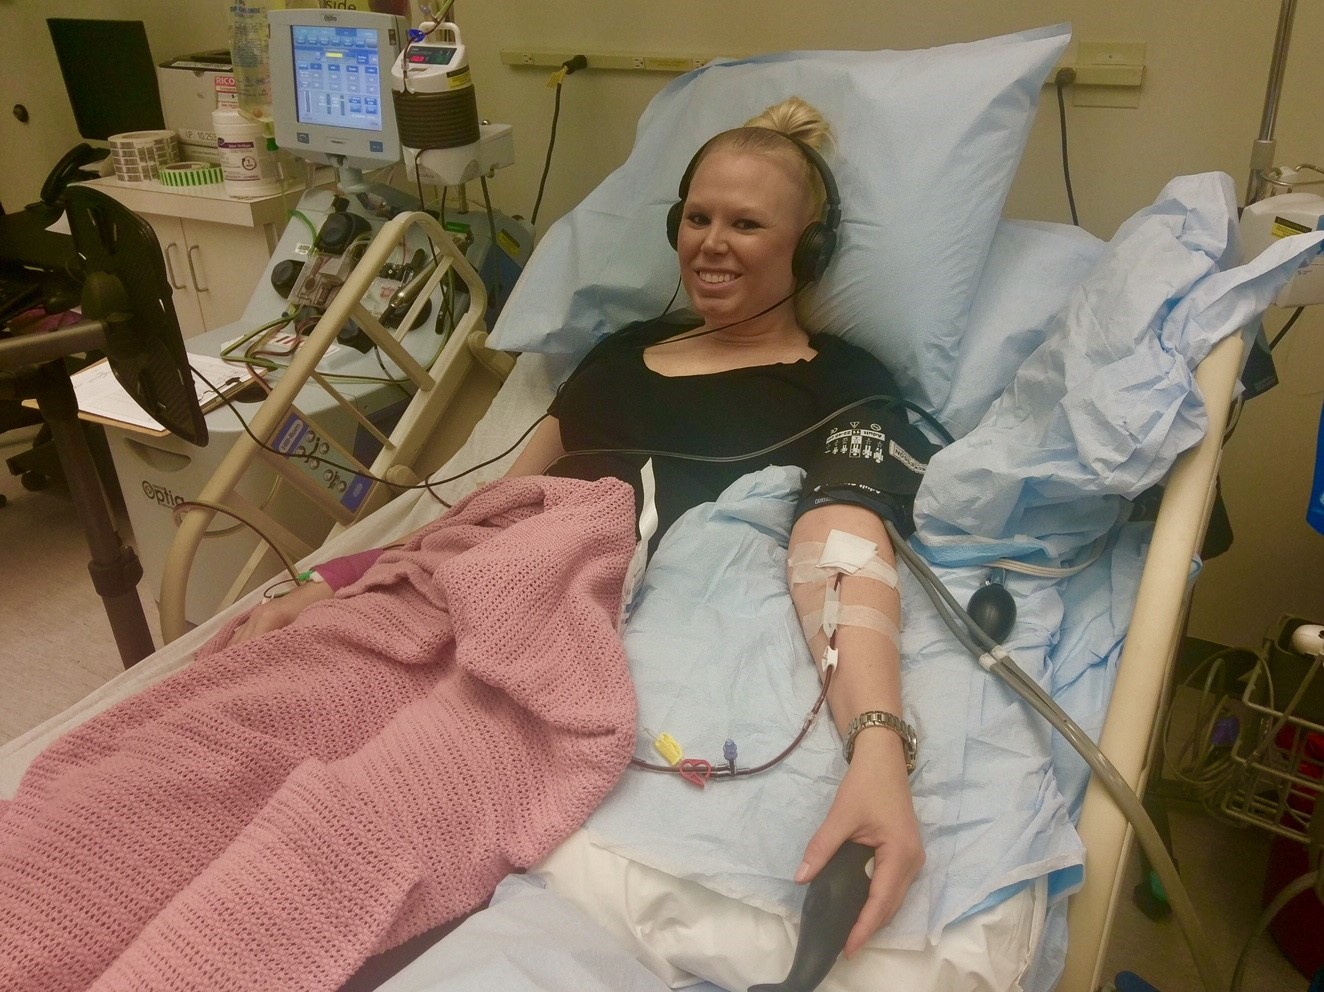 Leah, Be The Match BioTherapies donor, on donation day